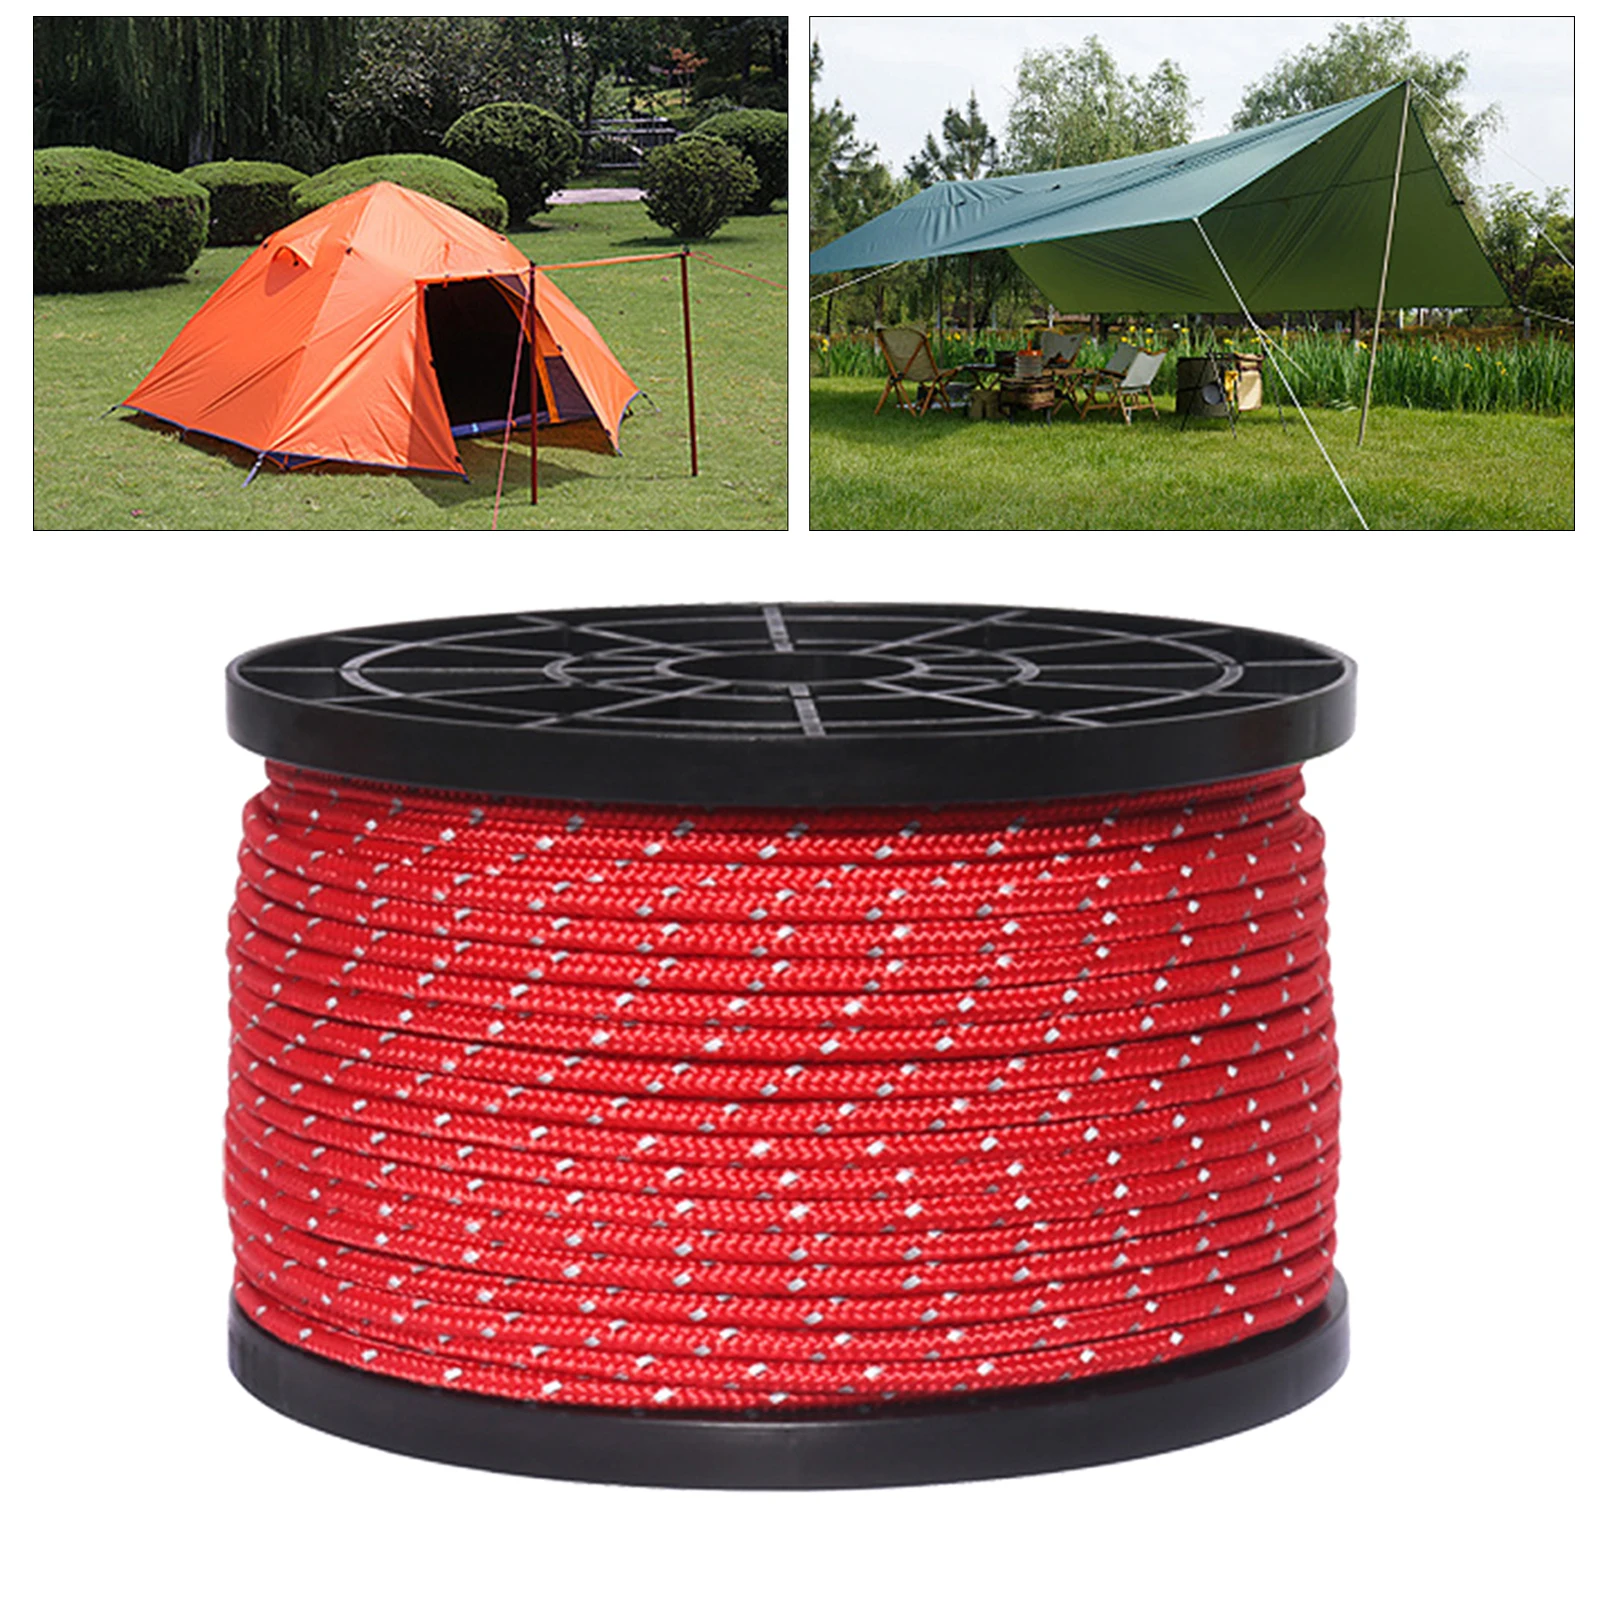 55 Yard Reflective Guyline Tent Awning Gazebo Rope Cord Paracord Guide Camping Accessories